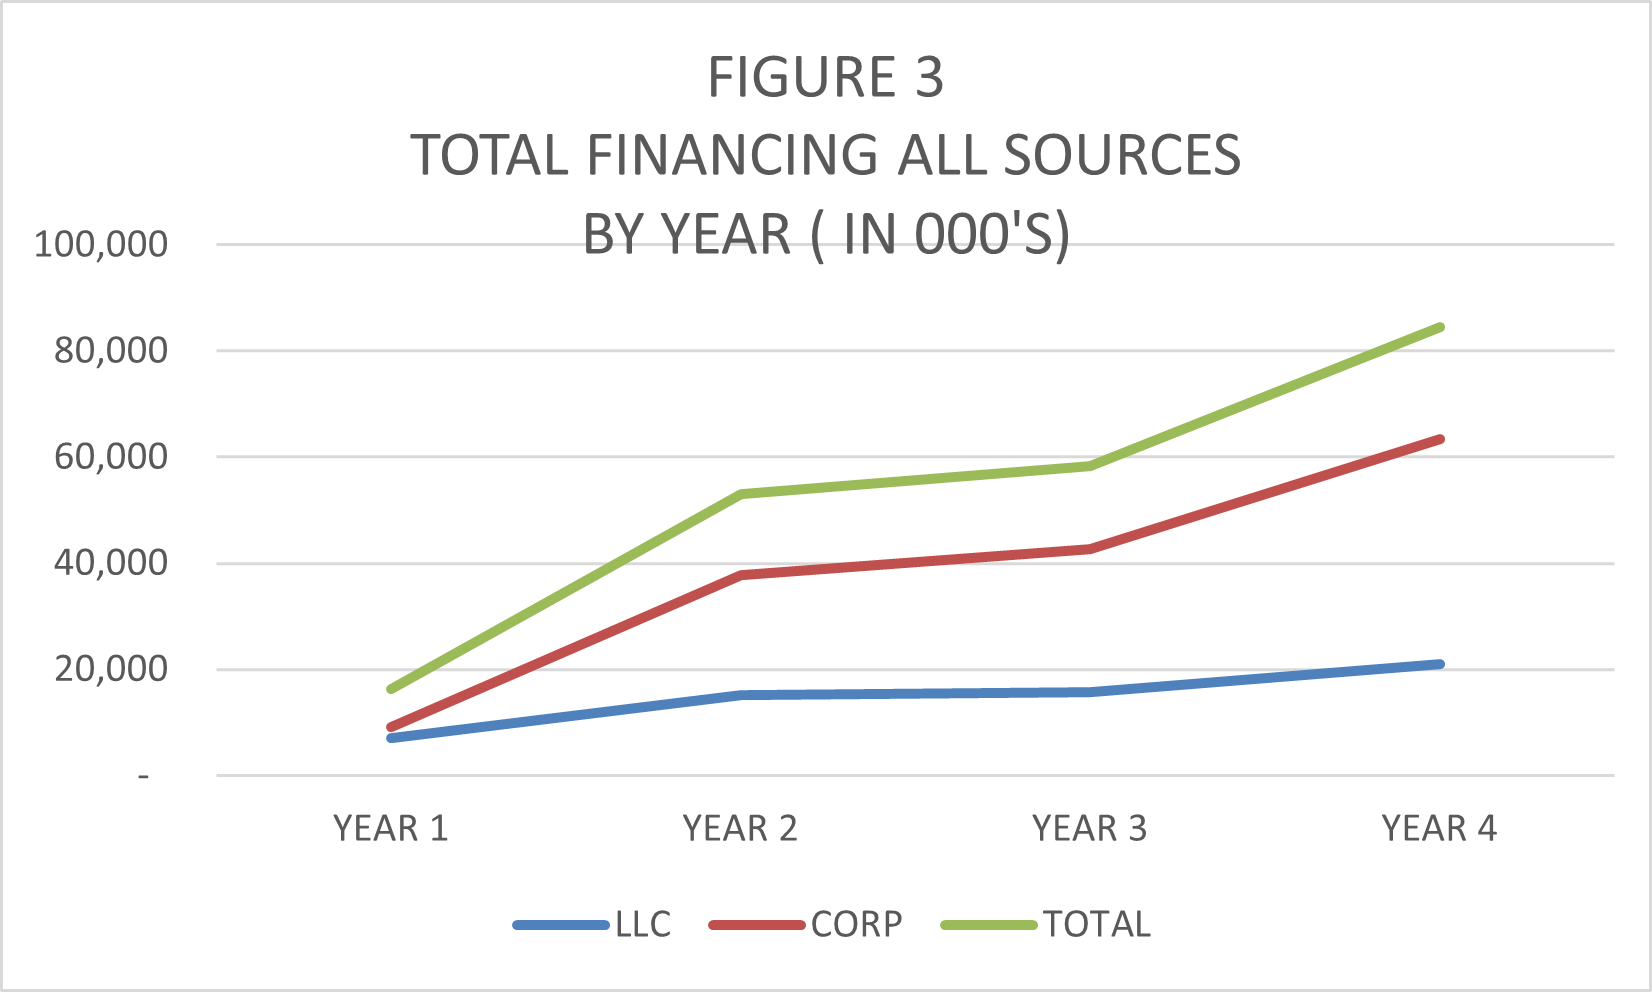 Financing from all sources: LLCs, Corps, and Total